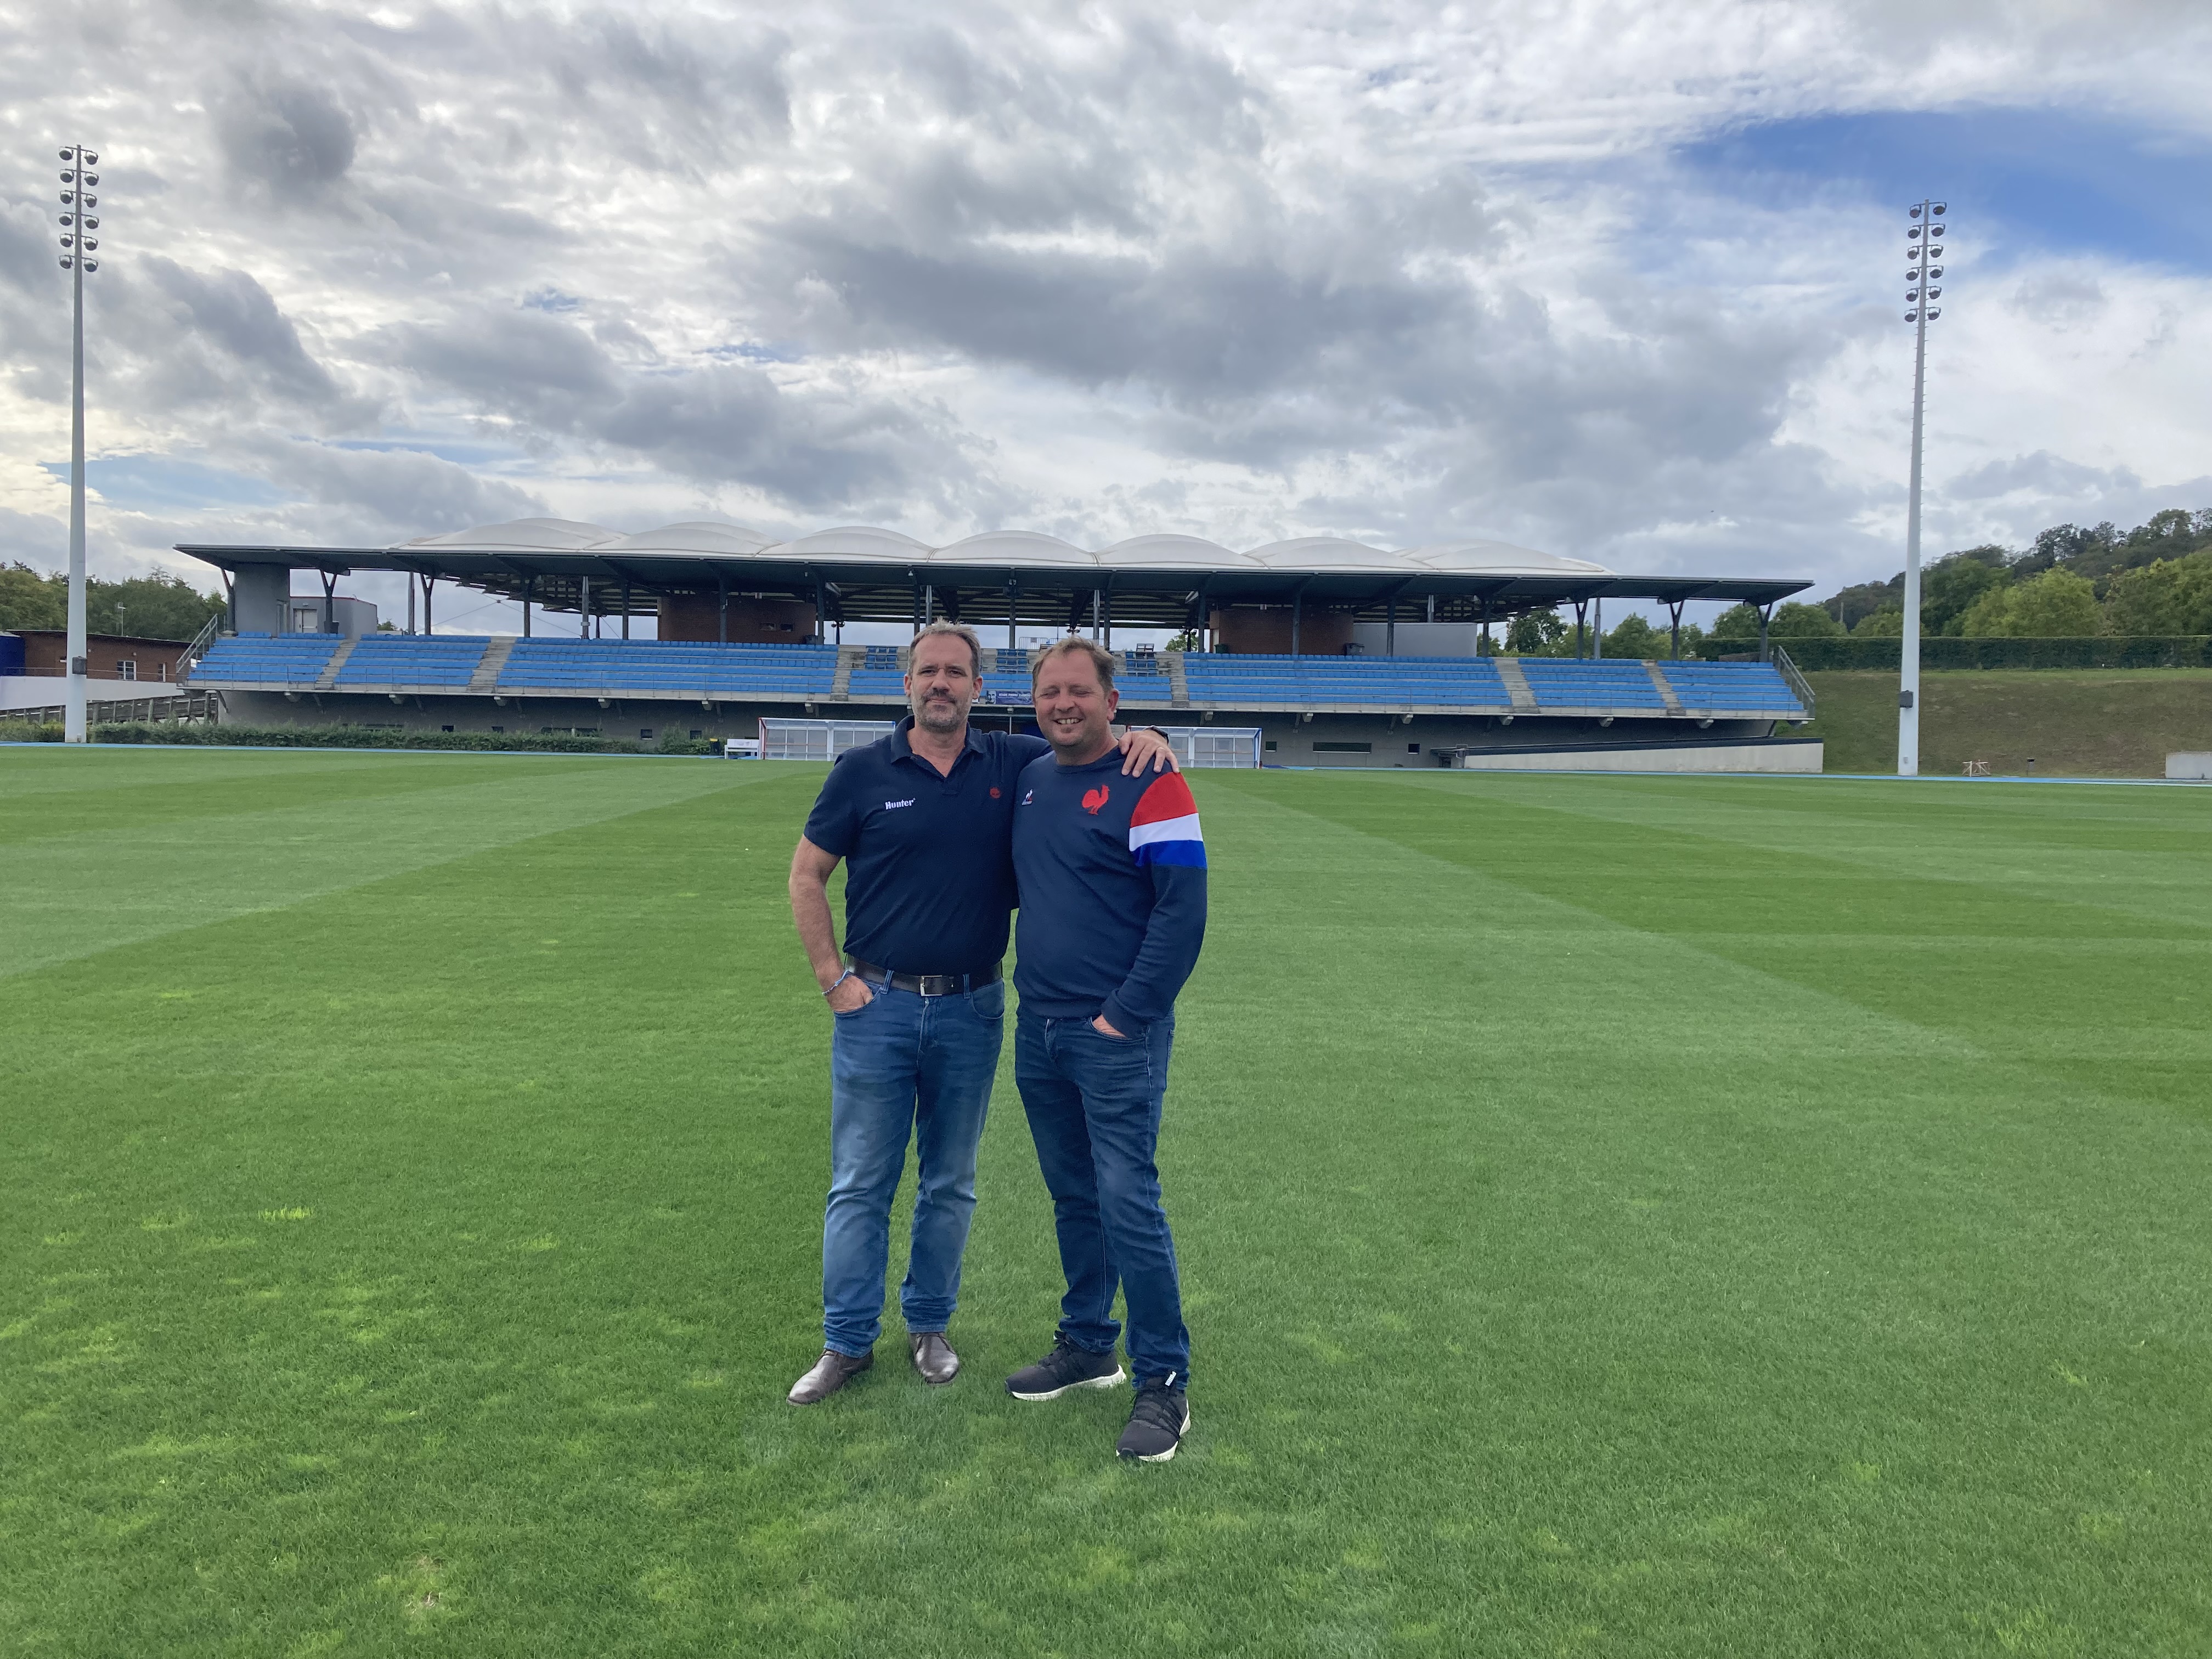 Geoffroy Benoit, head of Hunter’s Northern France sector and Mr. Serveau, responsible for the maintenance of the sports fields and the green spaces on the site.